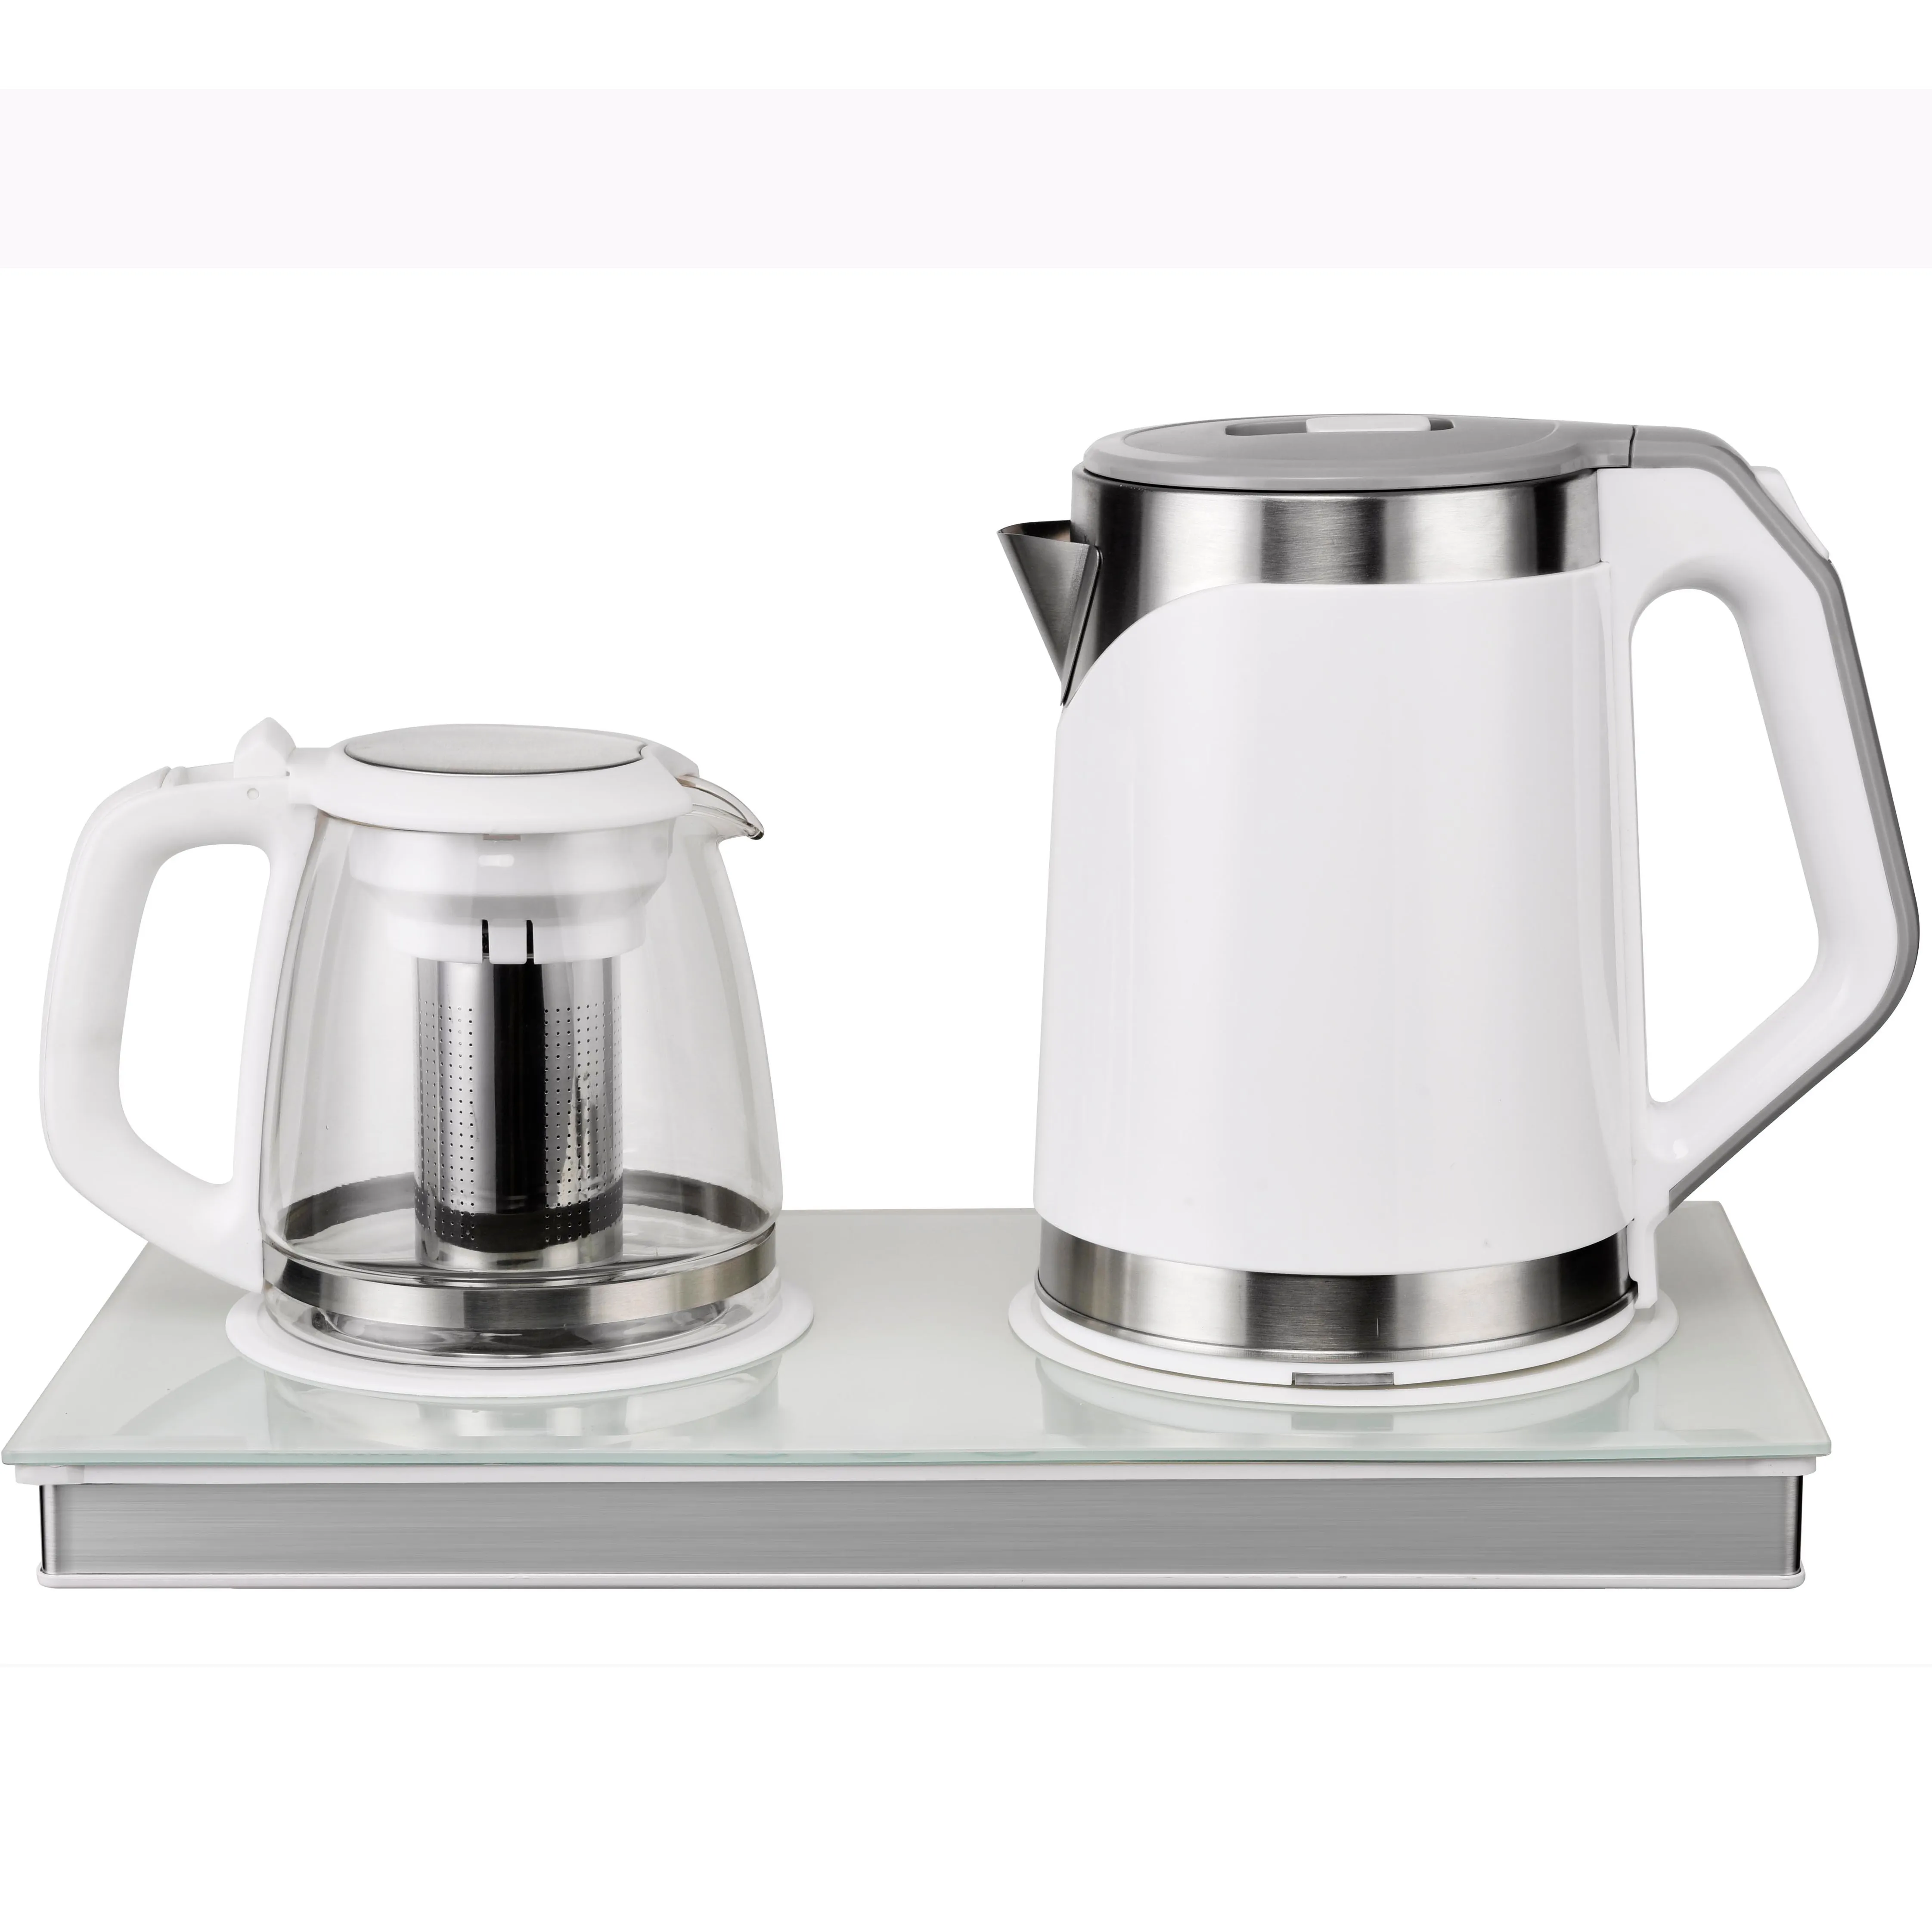 Cheap Best Electric Kettle Tray Set 1.8 L Water Kettle Electric Glass Tea Mater Electric Kettle Set Home appliances